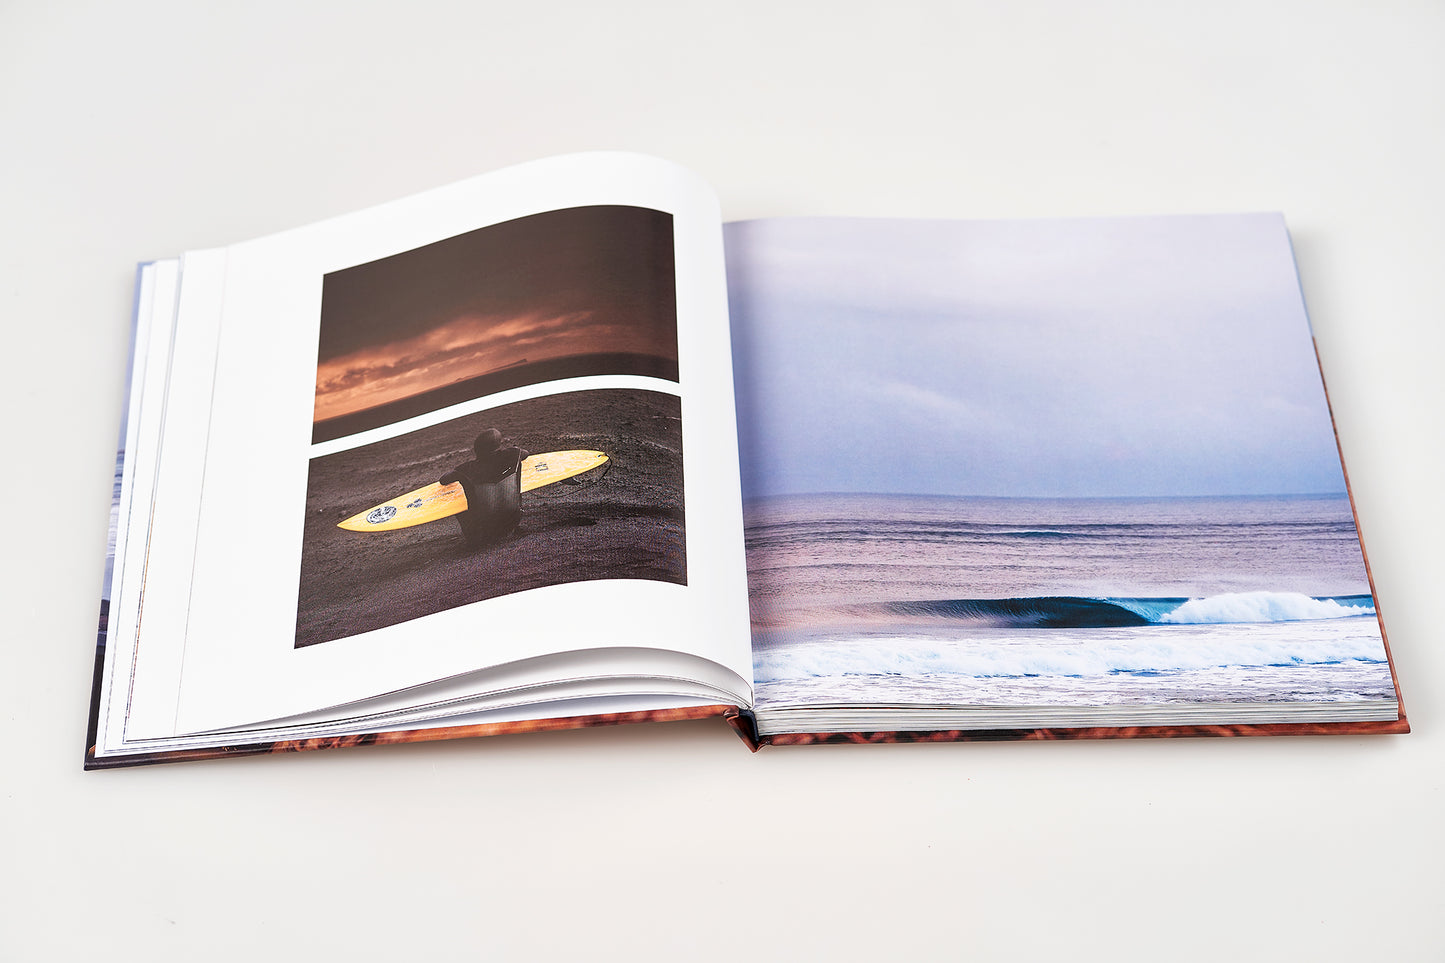 Island X- A photography book by Mark McInnis- Standard edition open.